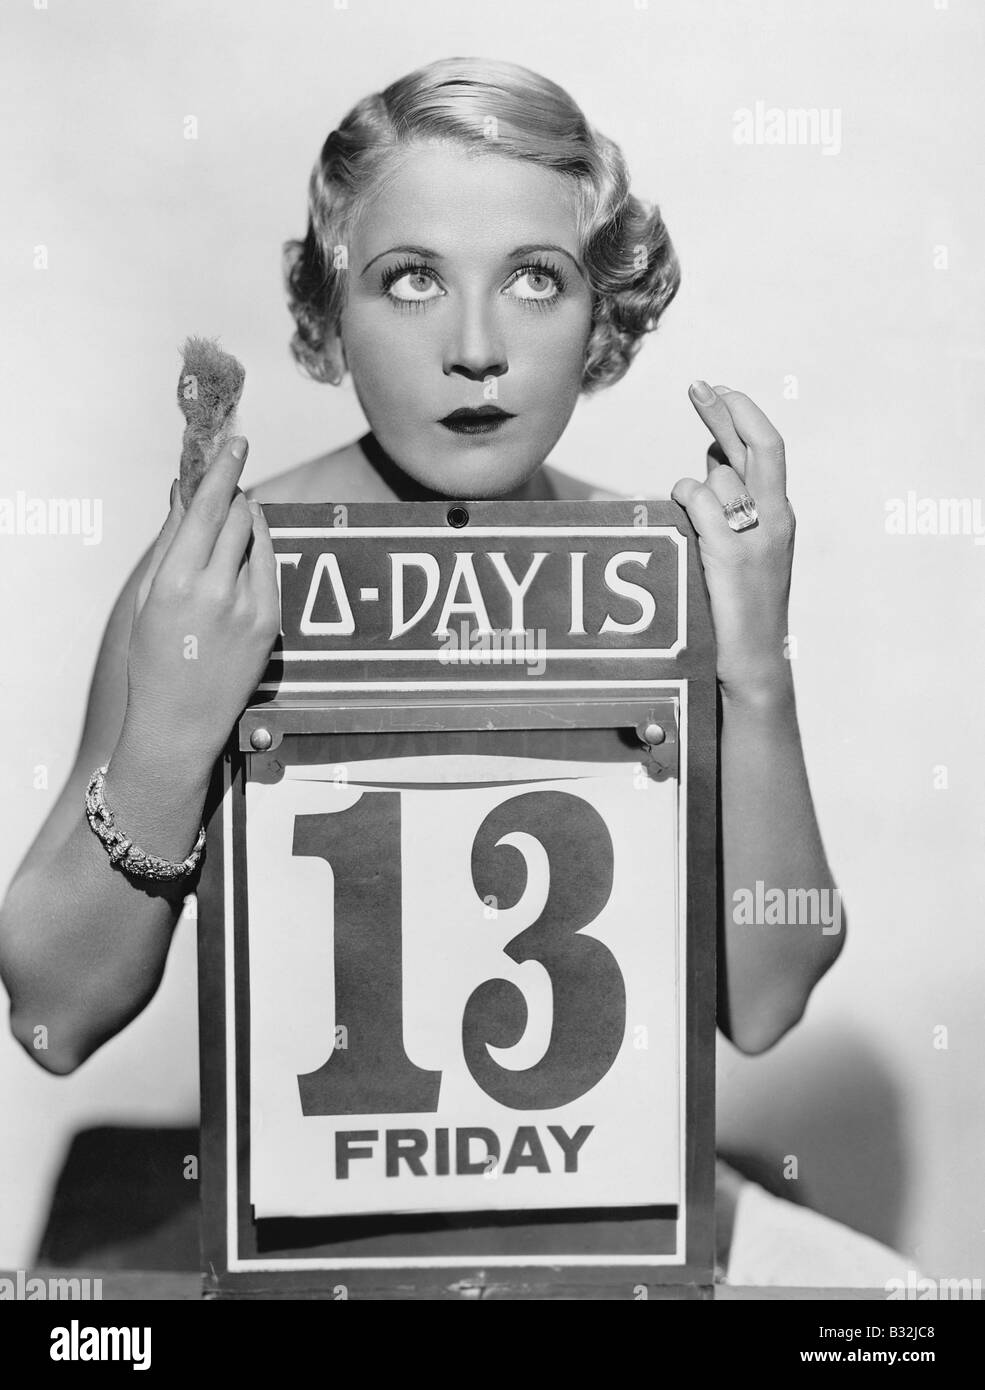 FRIDAY THE 13TH Banque D'Images